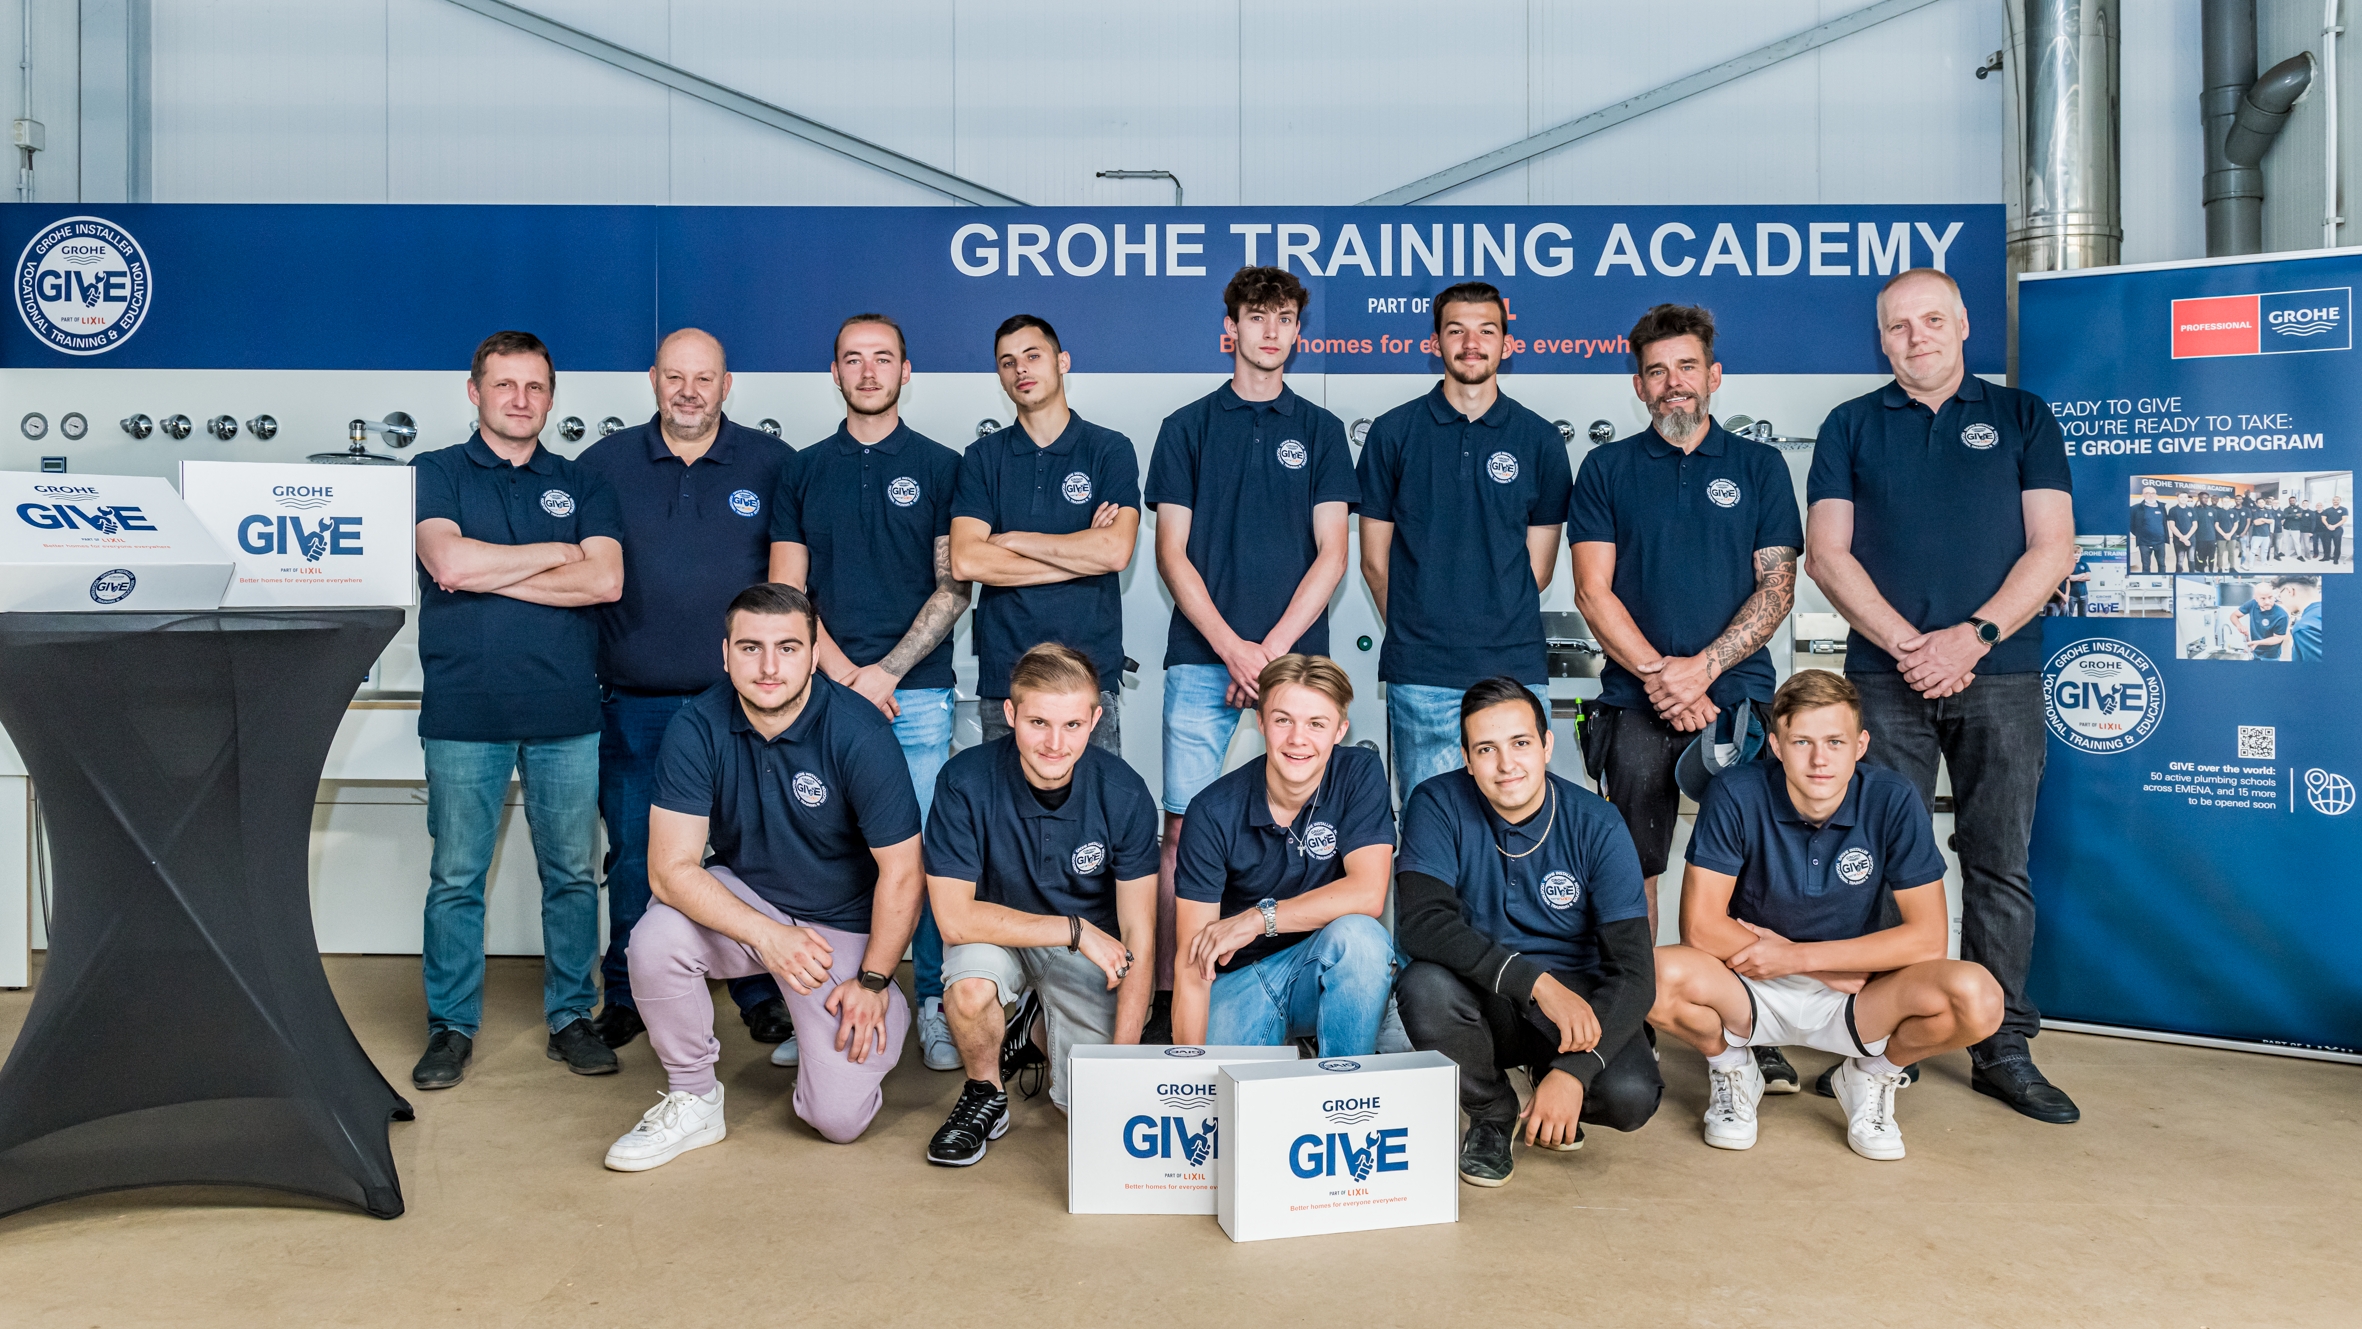 Program GROHE GIVE